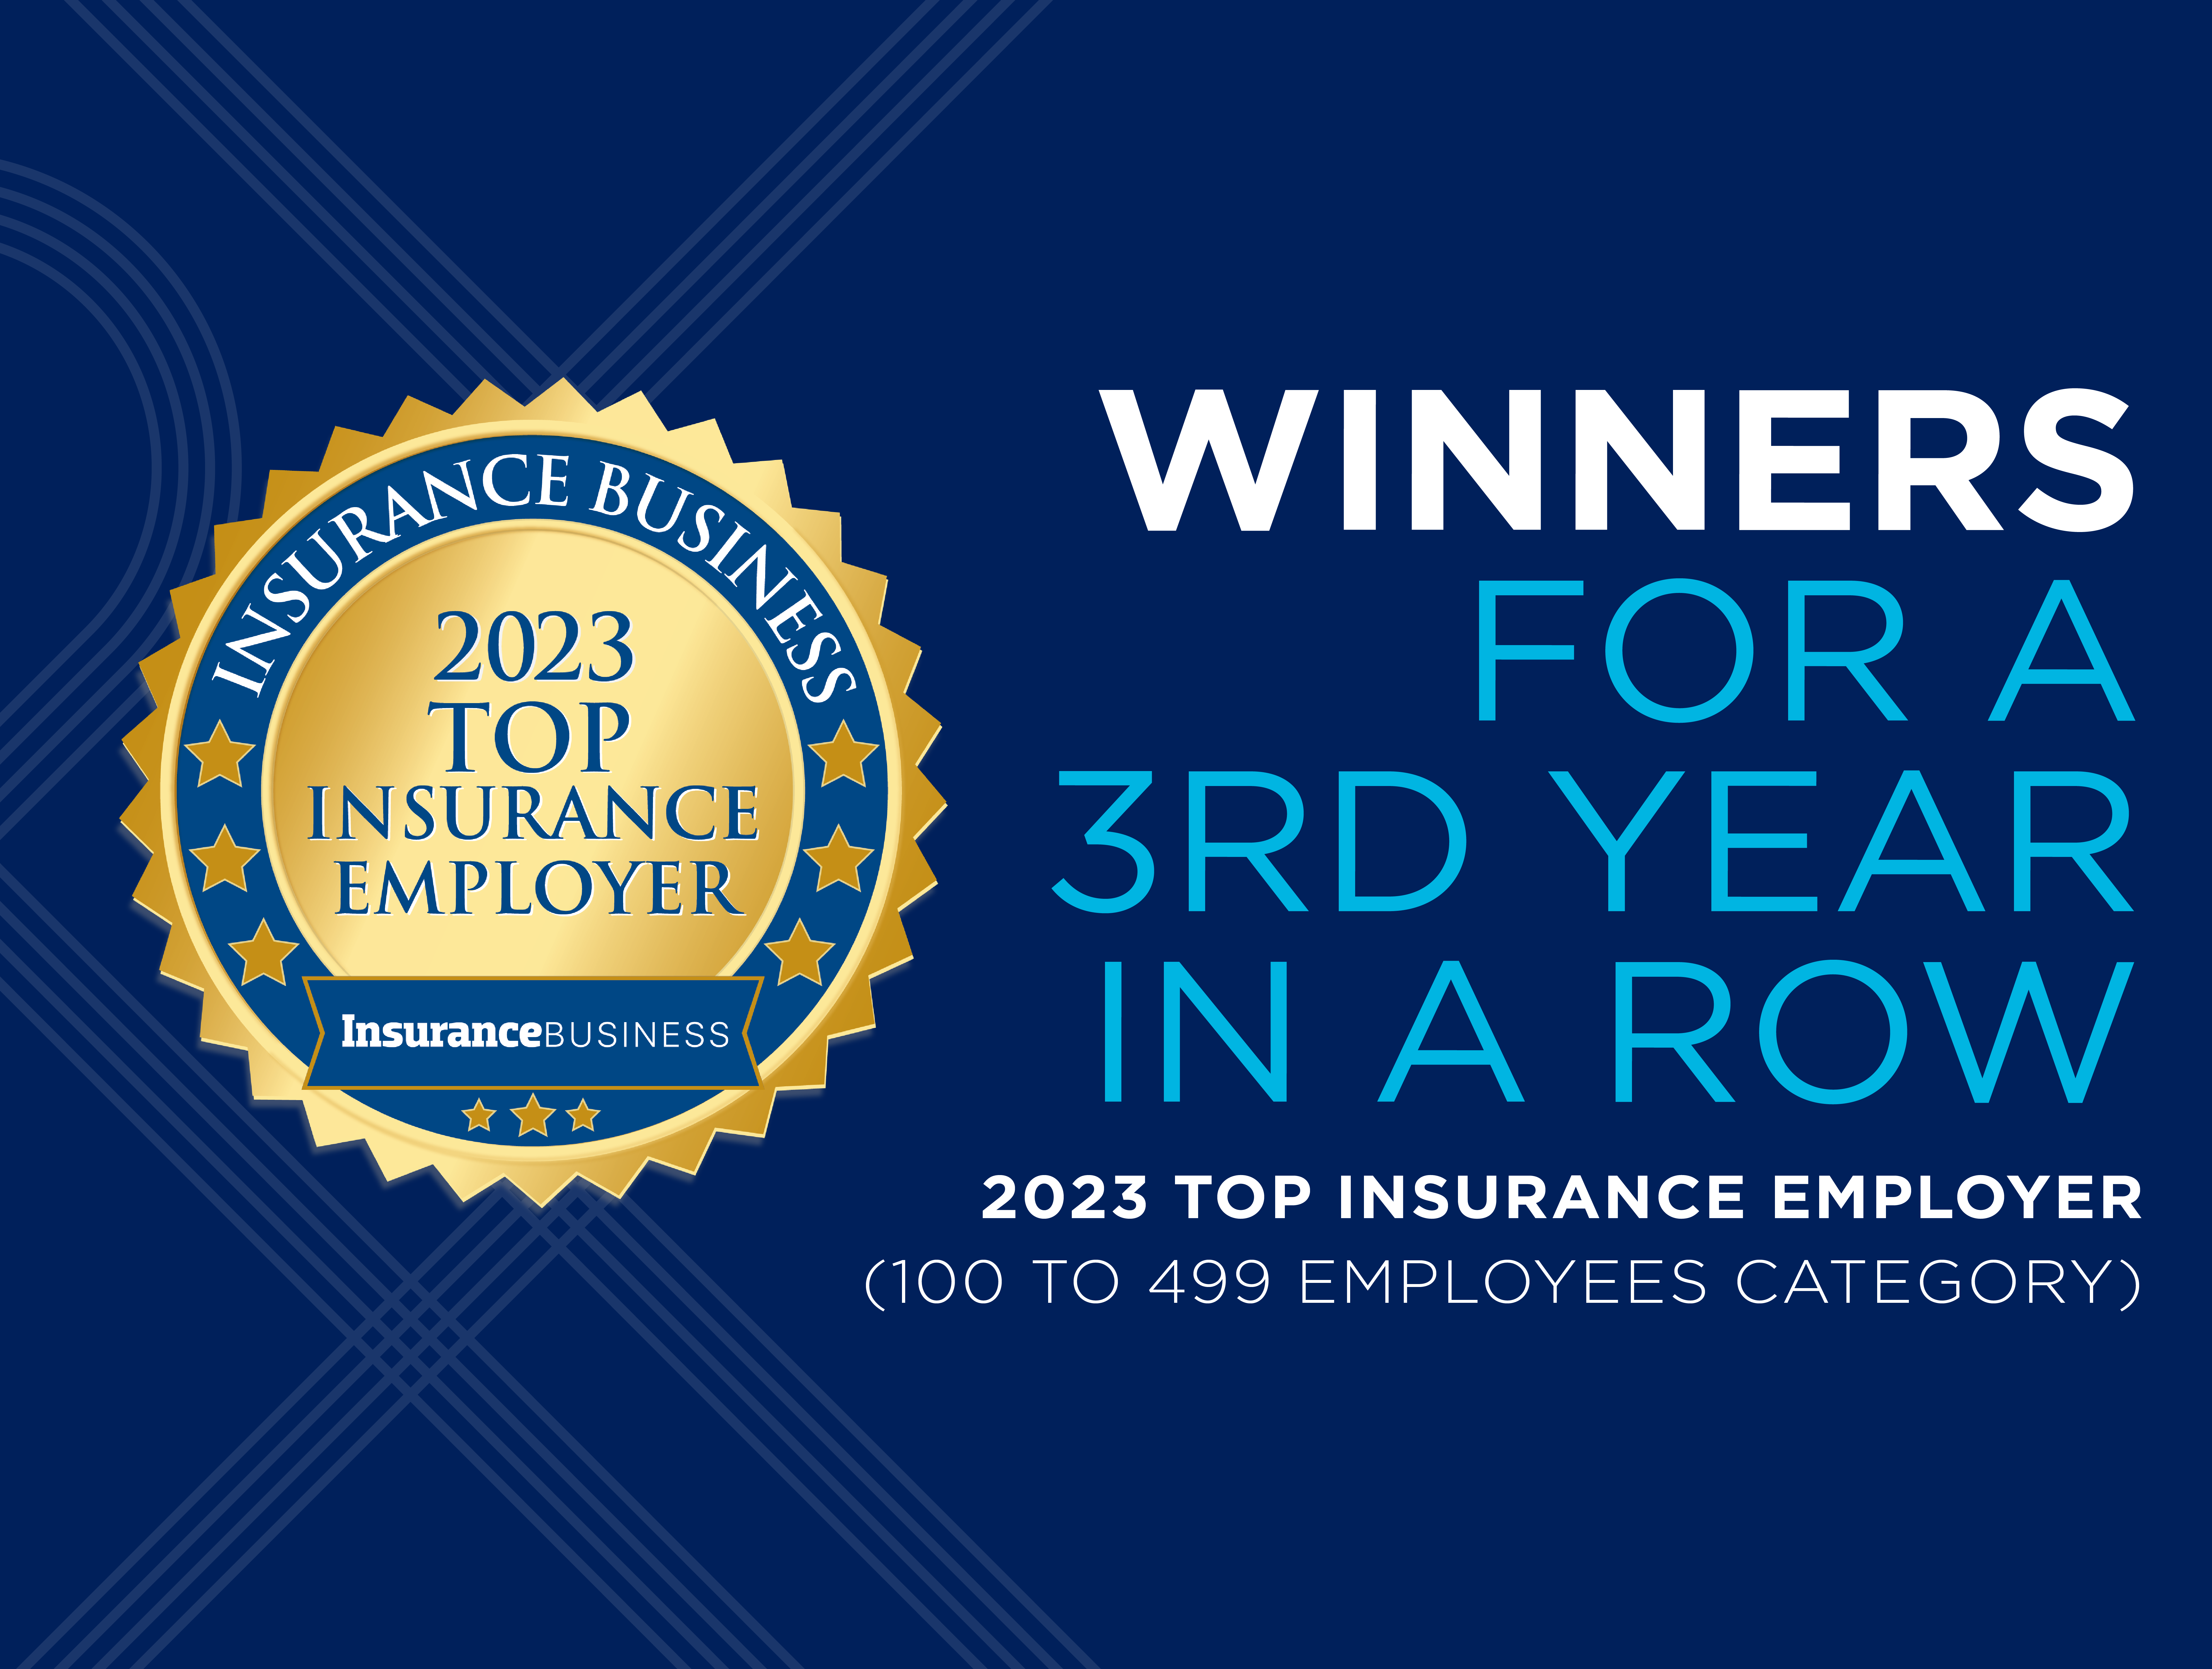 Insurance Business Top Insurance Employer - Winner for 3rd year in a row